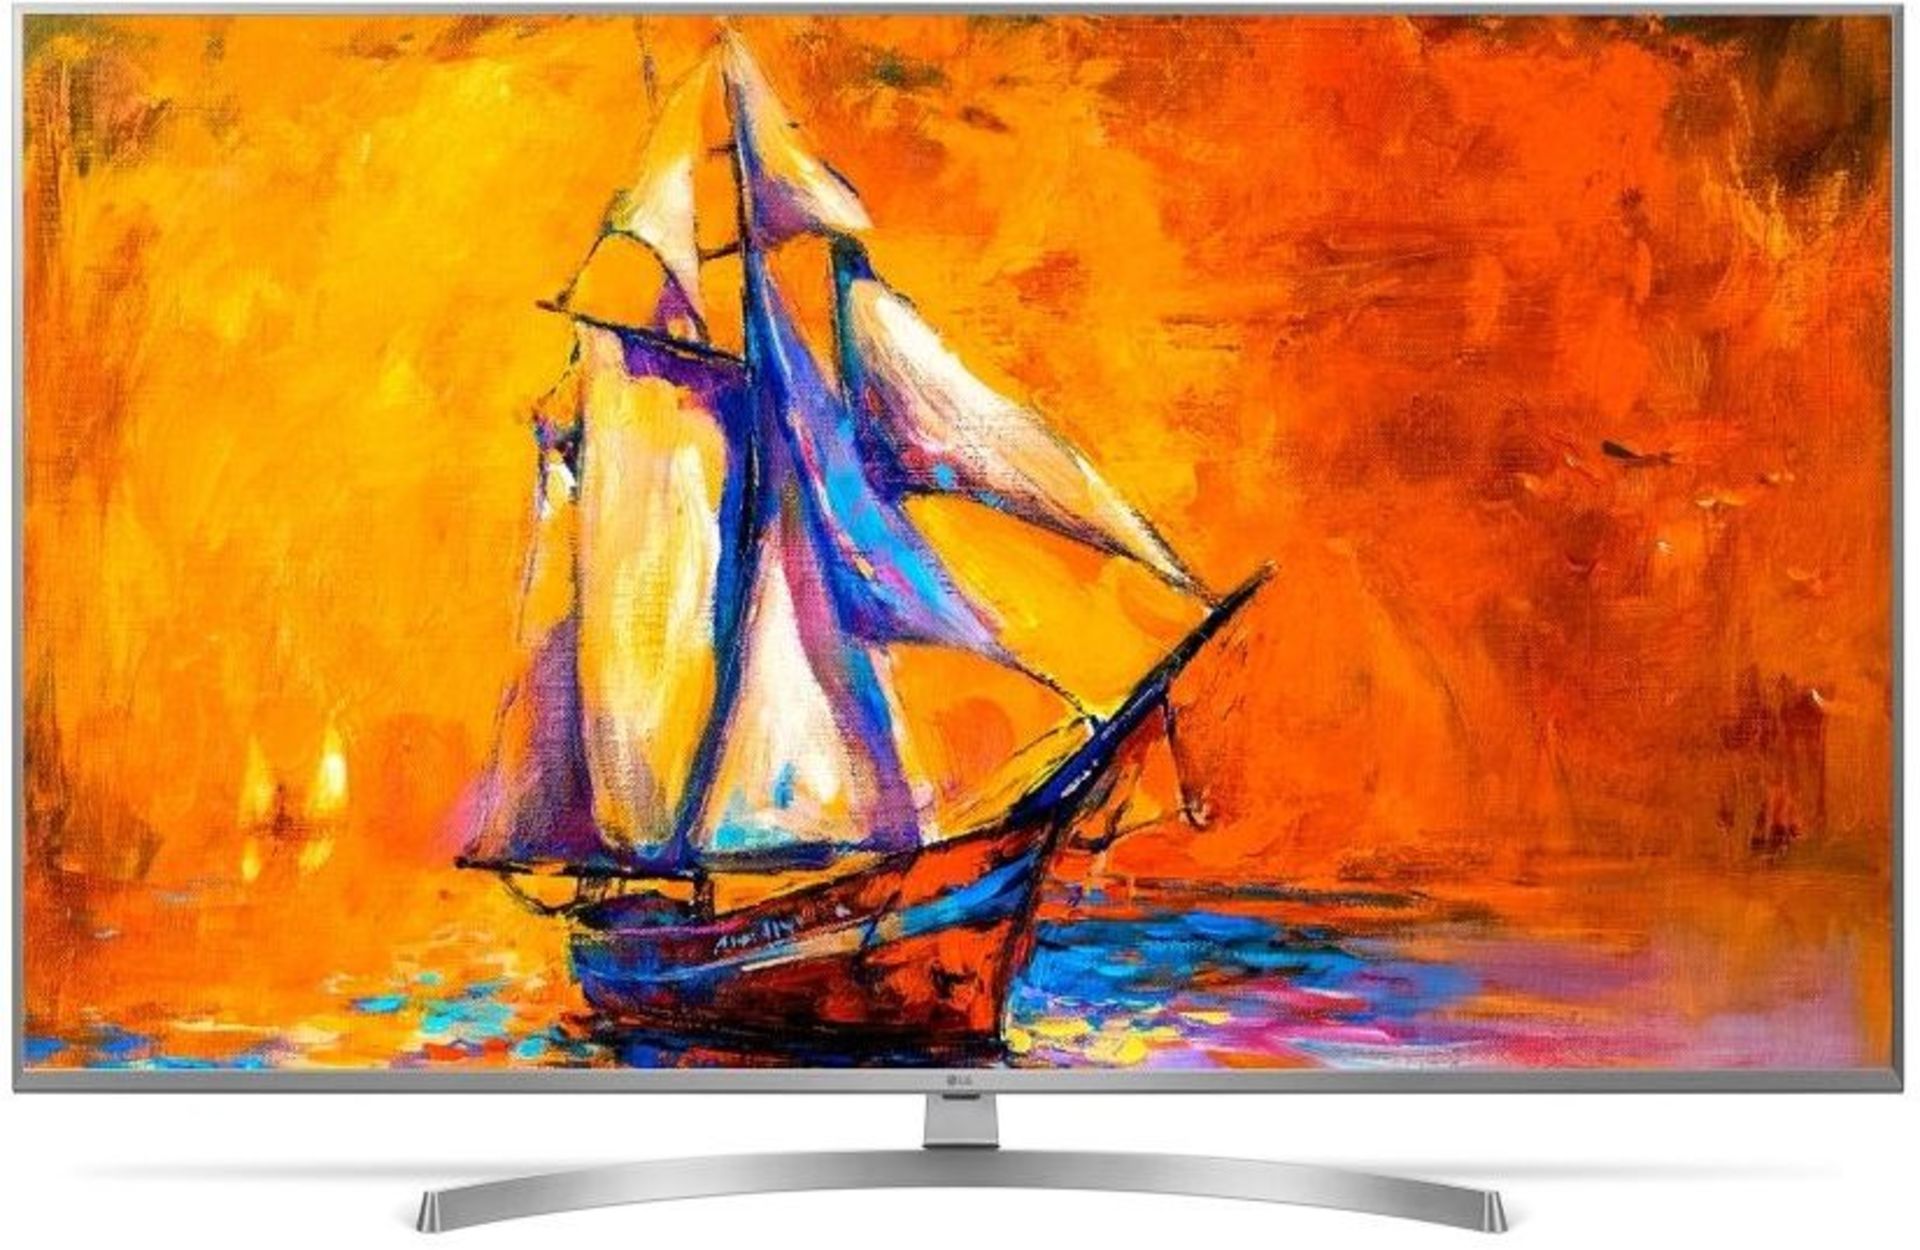 V Grade A LG 49 Inch ACTIVE HDR 4K ULTRA HD LED SMART TV WITH FREEVIEW HD & WEBOS 4.0 & WIFI - AI